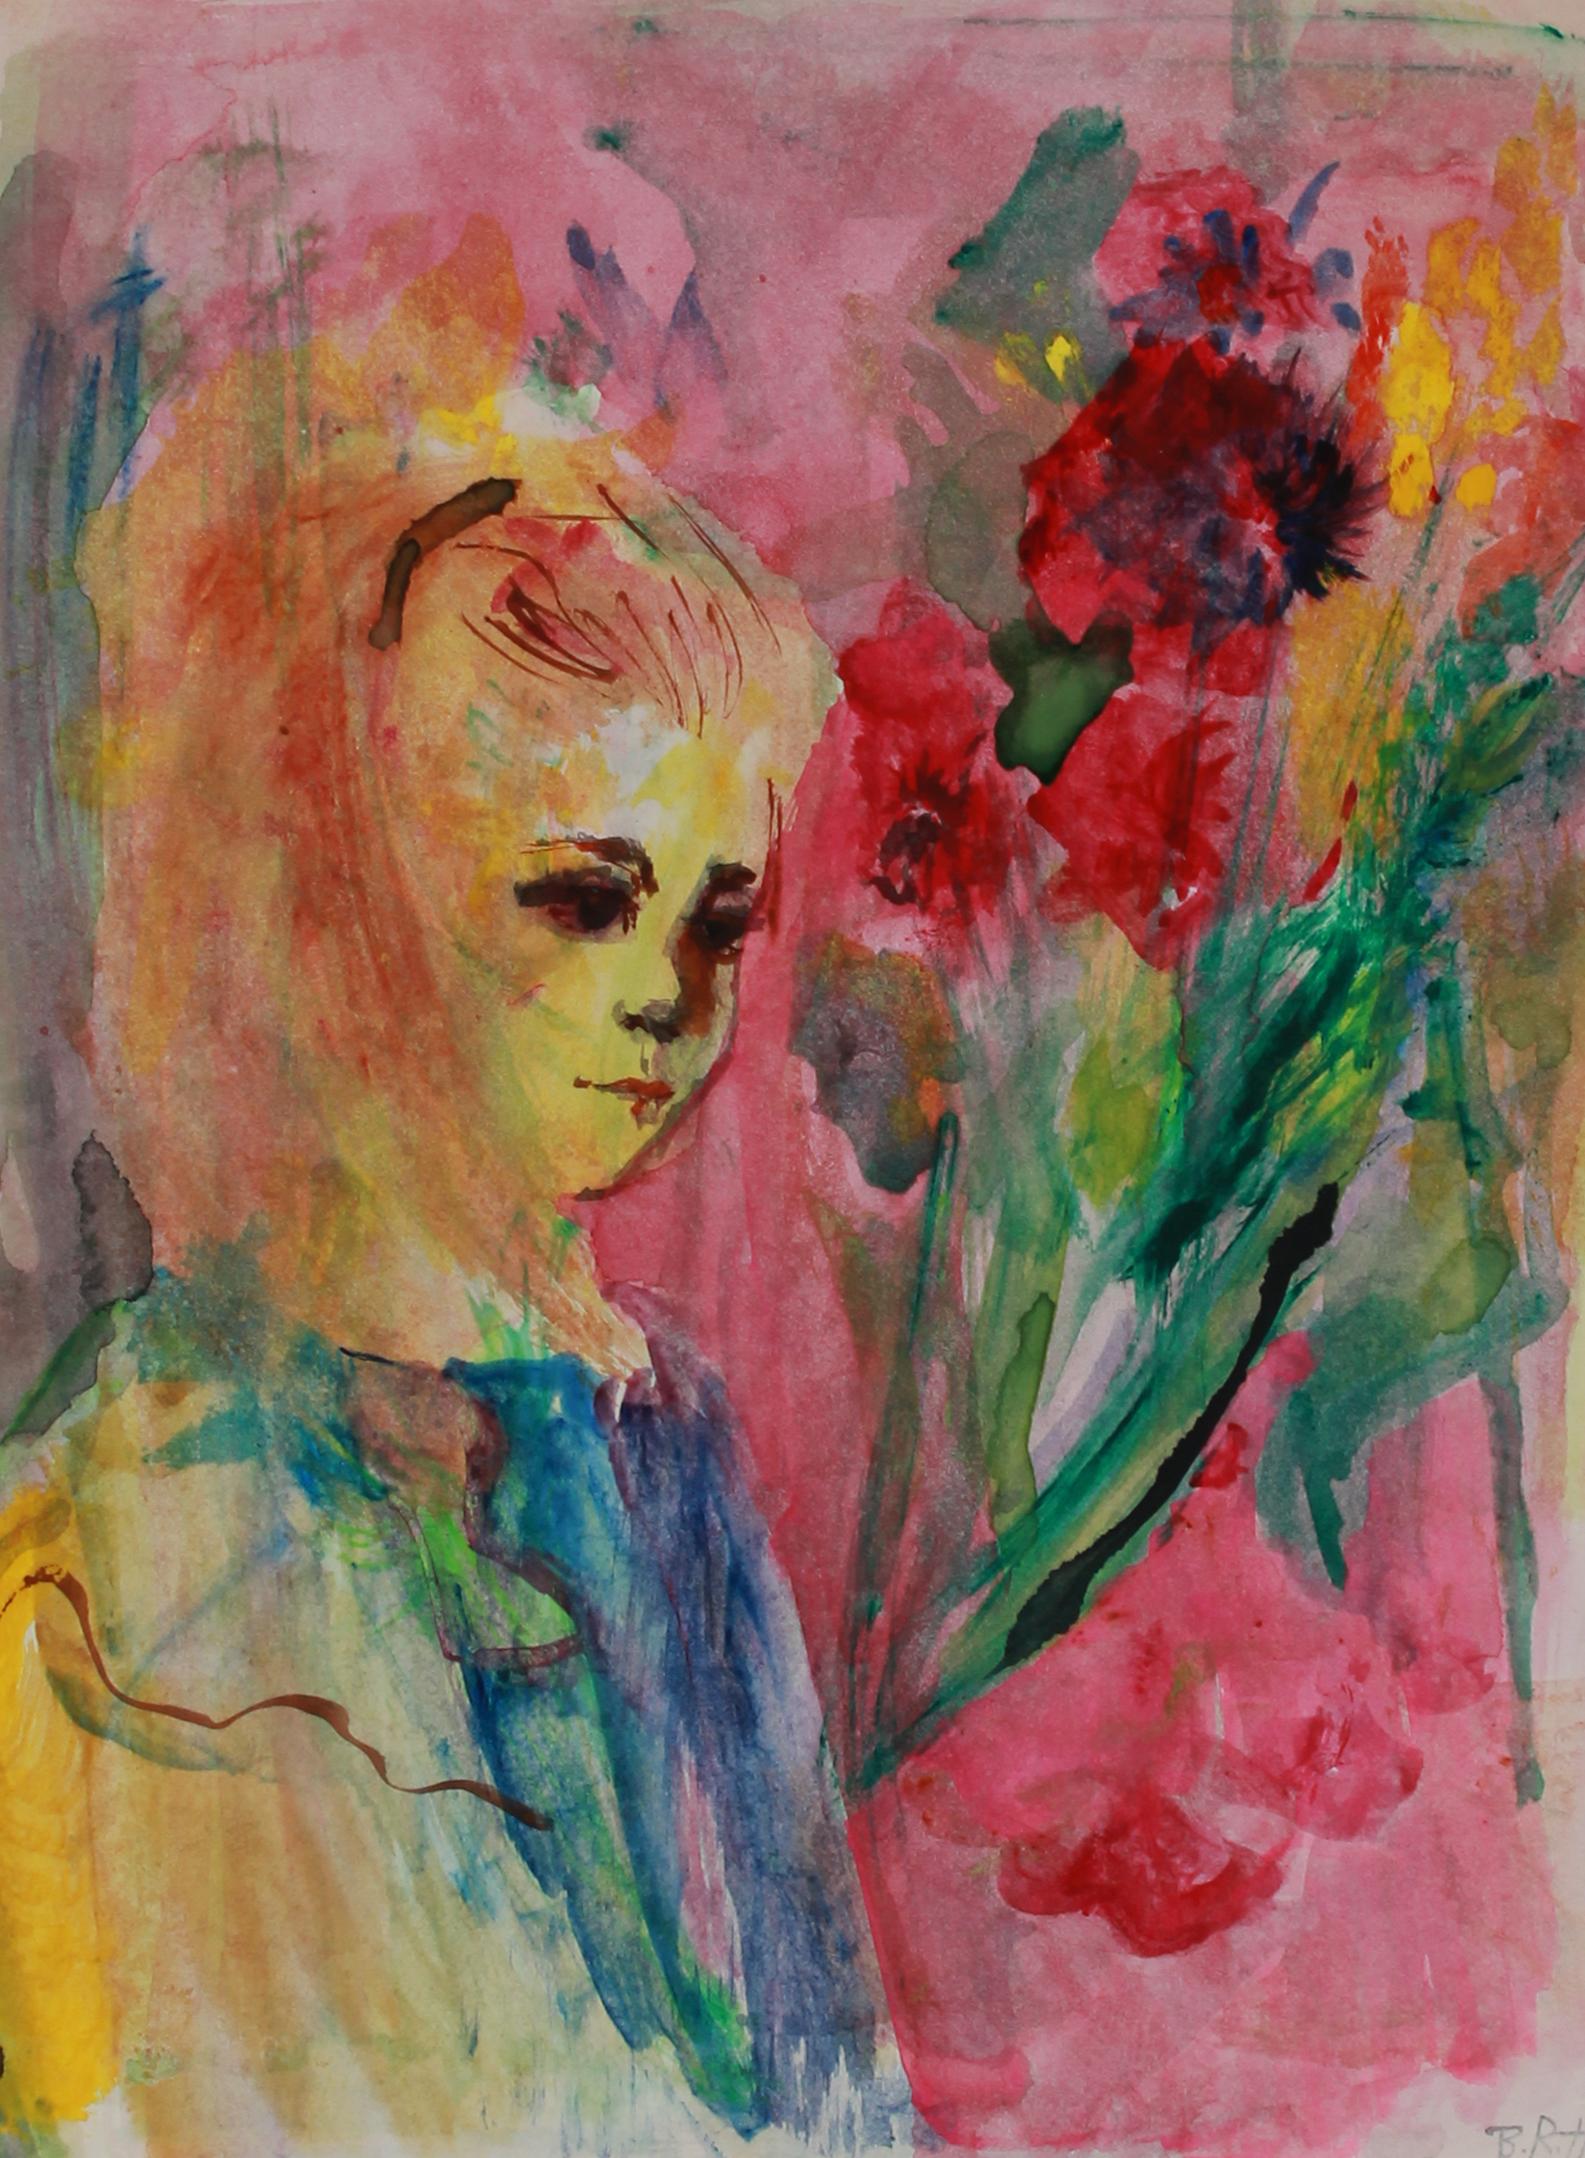 Colorful Portrait & Still Life 1940-60s Gouache - Painting by Barbara Rogers Houseworth